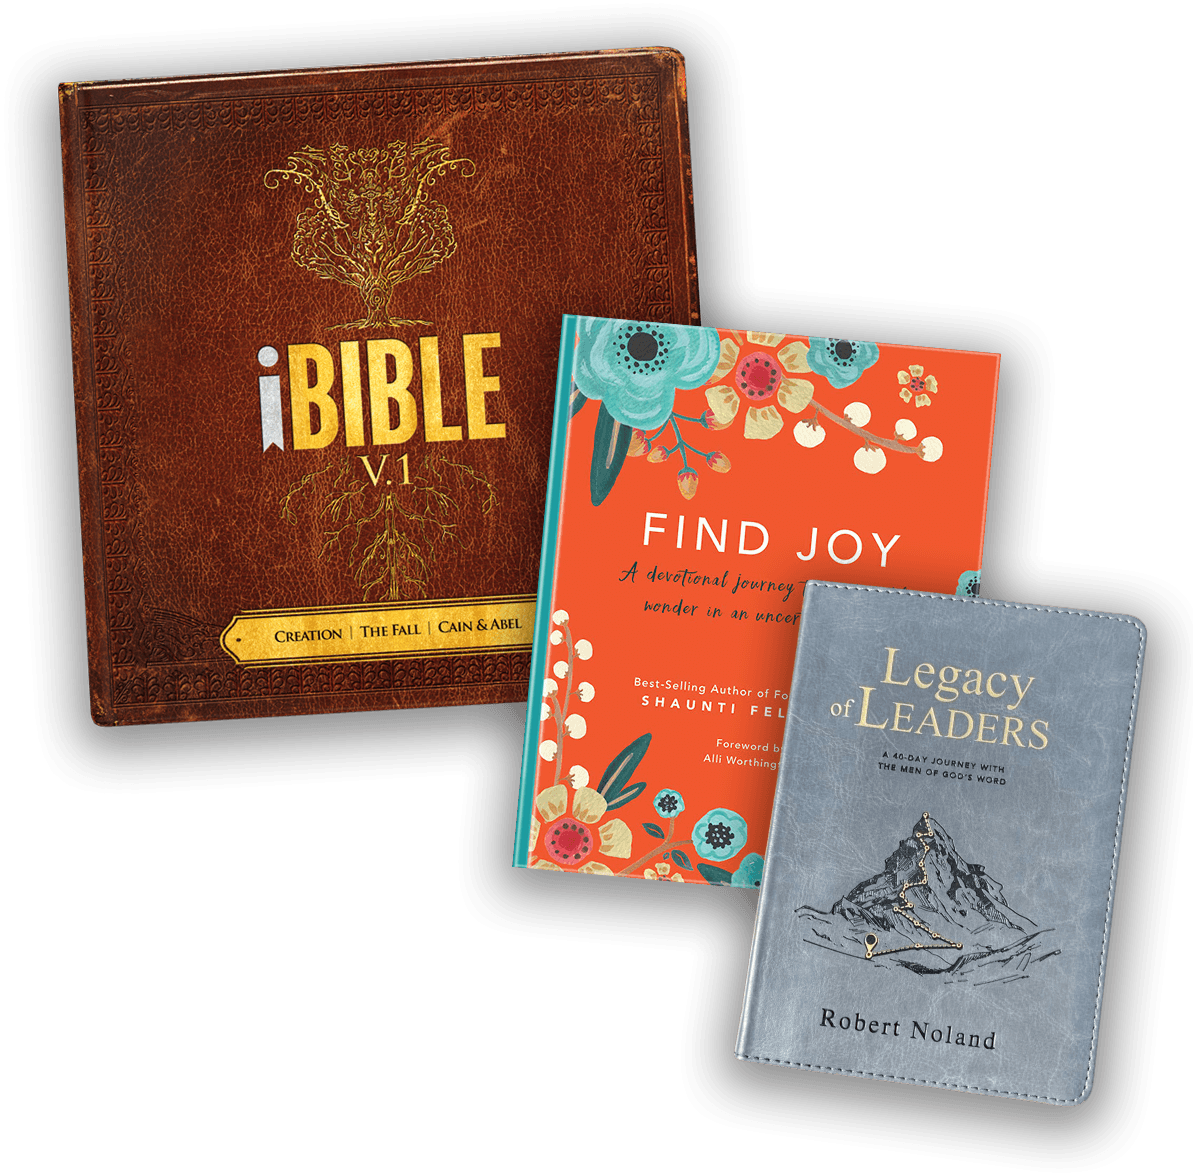 Family Gift Set, consisting of Find Joy Devotional, Legacy of Leaders Devotional, and the iBIBLE Illustrated Storybook